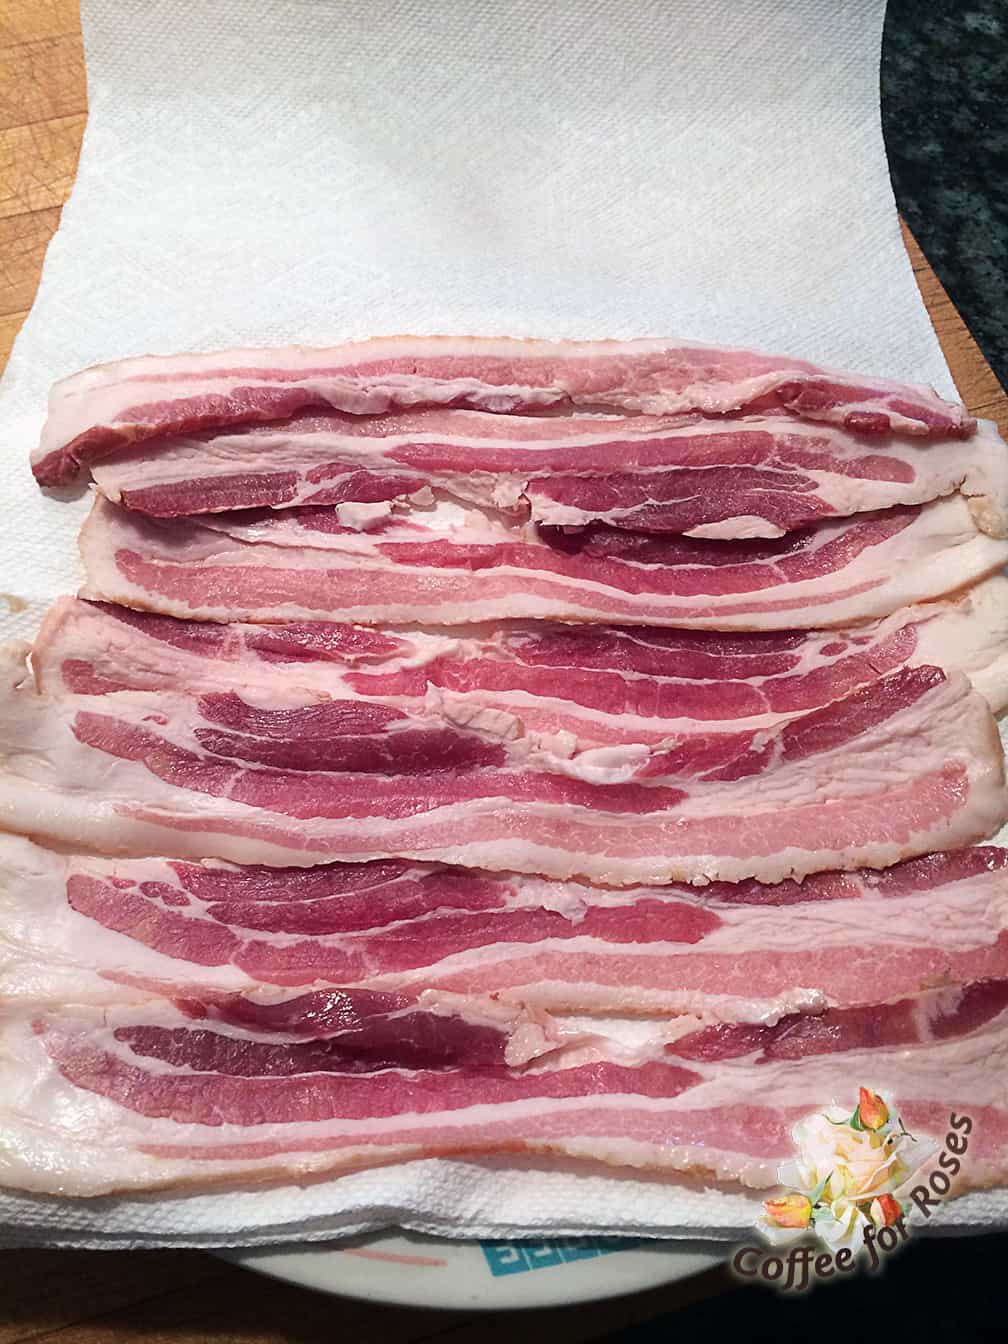 I cook my bacon in the microwave so that it doesn't smell up the entire house with bacon fumes. I put three or four layers of paper towel down on a plate leaving a piece of paper towel large enough to fold over the bacon after it's on the place. I line up the bacon closely on that plate and cover with one layer of paper towel to prevent splatter in the microwave. Cook on high for four minutes and then check it - some microwaves will need another one or two minutes to cook the bacon crispy. If the pieces are more done on the edges, either shuffle them around or take out the finished strips and cook the others a bit longer.